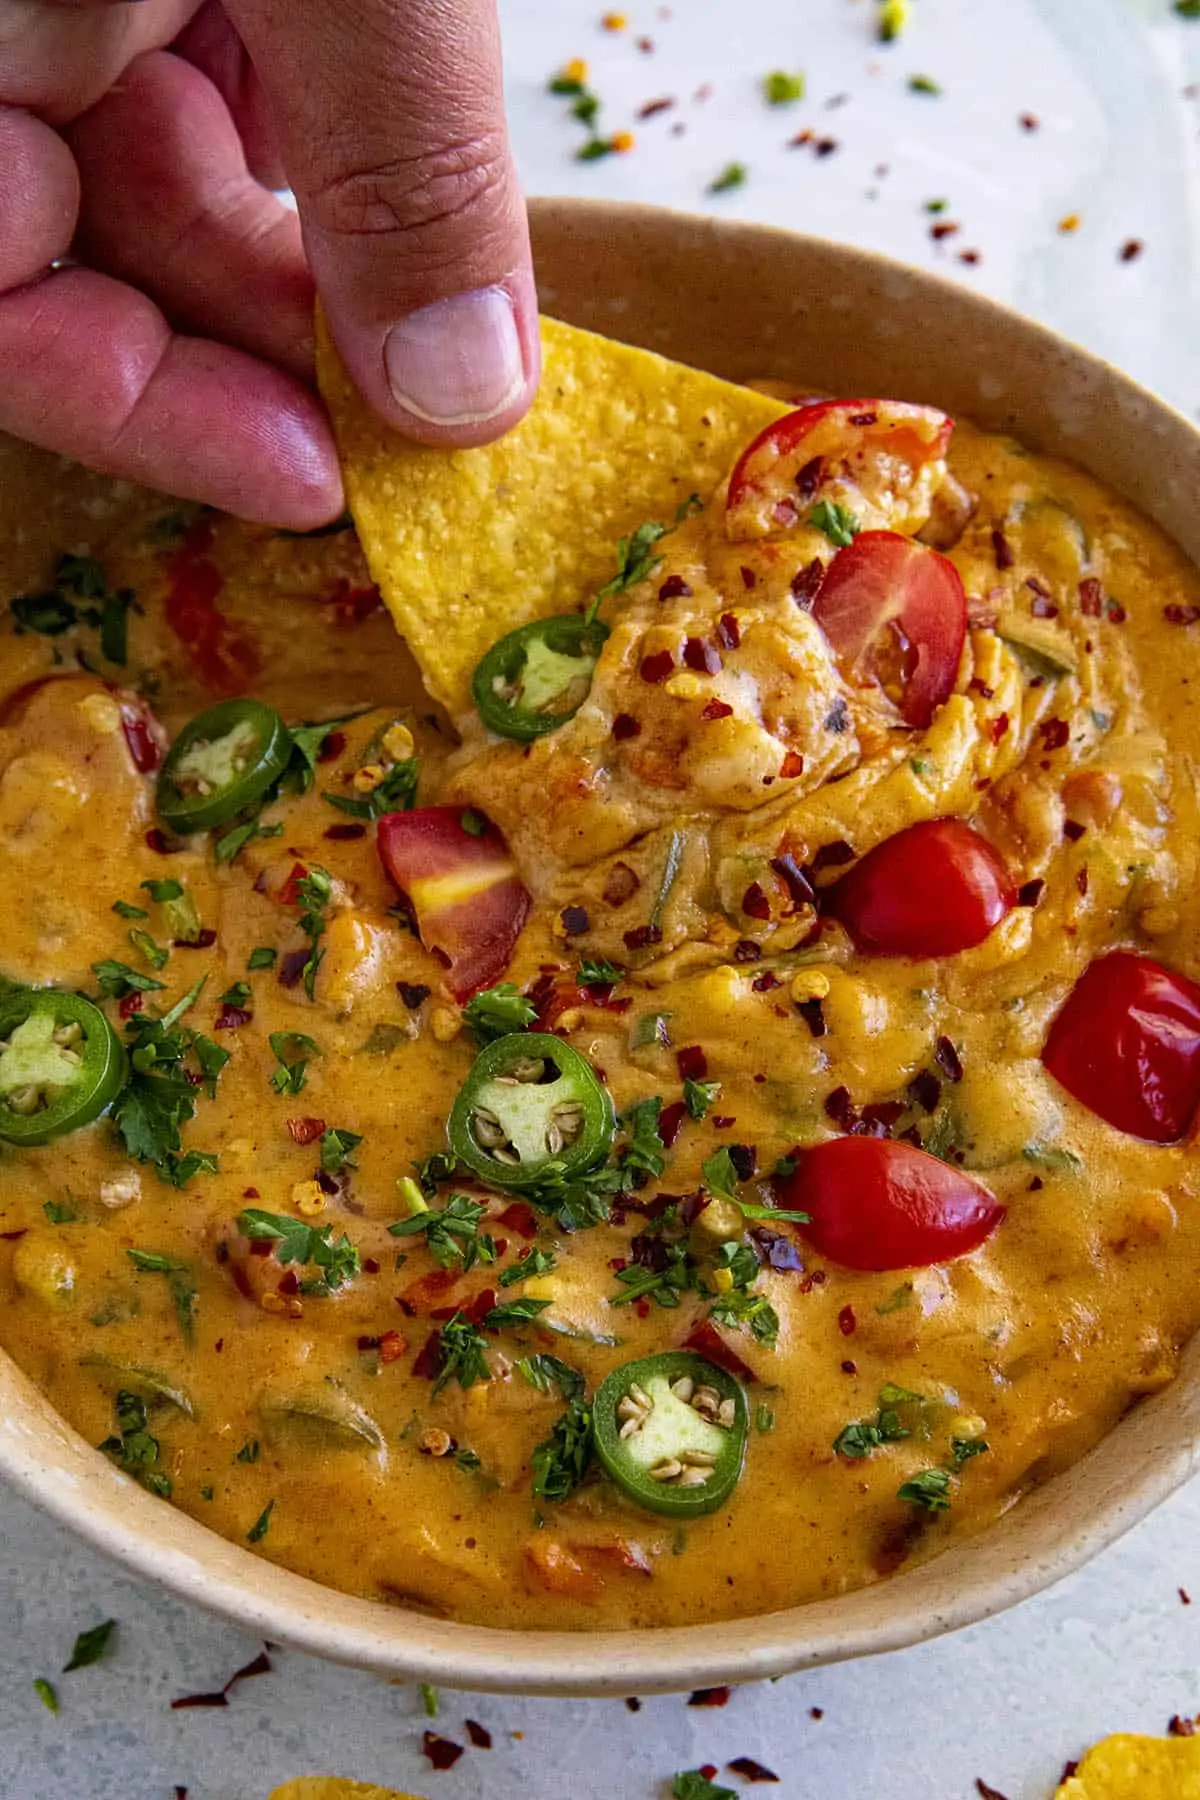 Dipping a chip into a bowl of hot queso dip